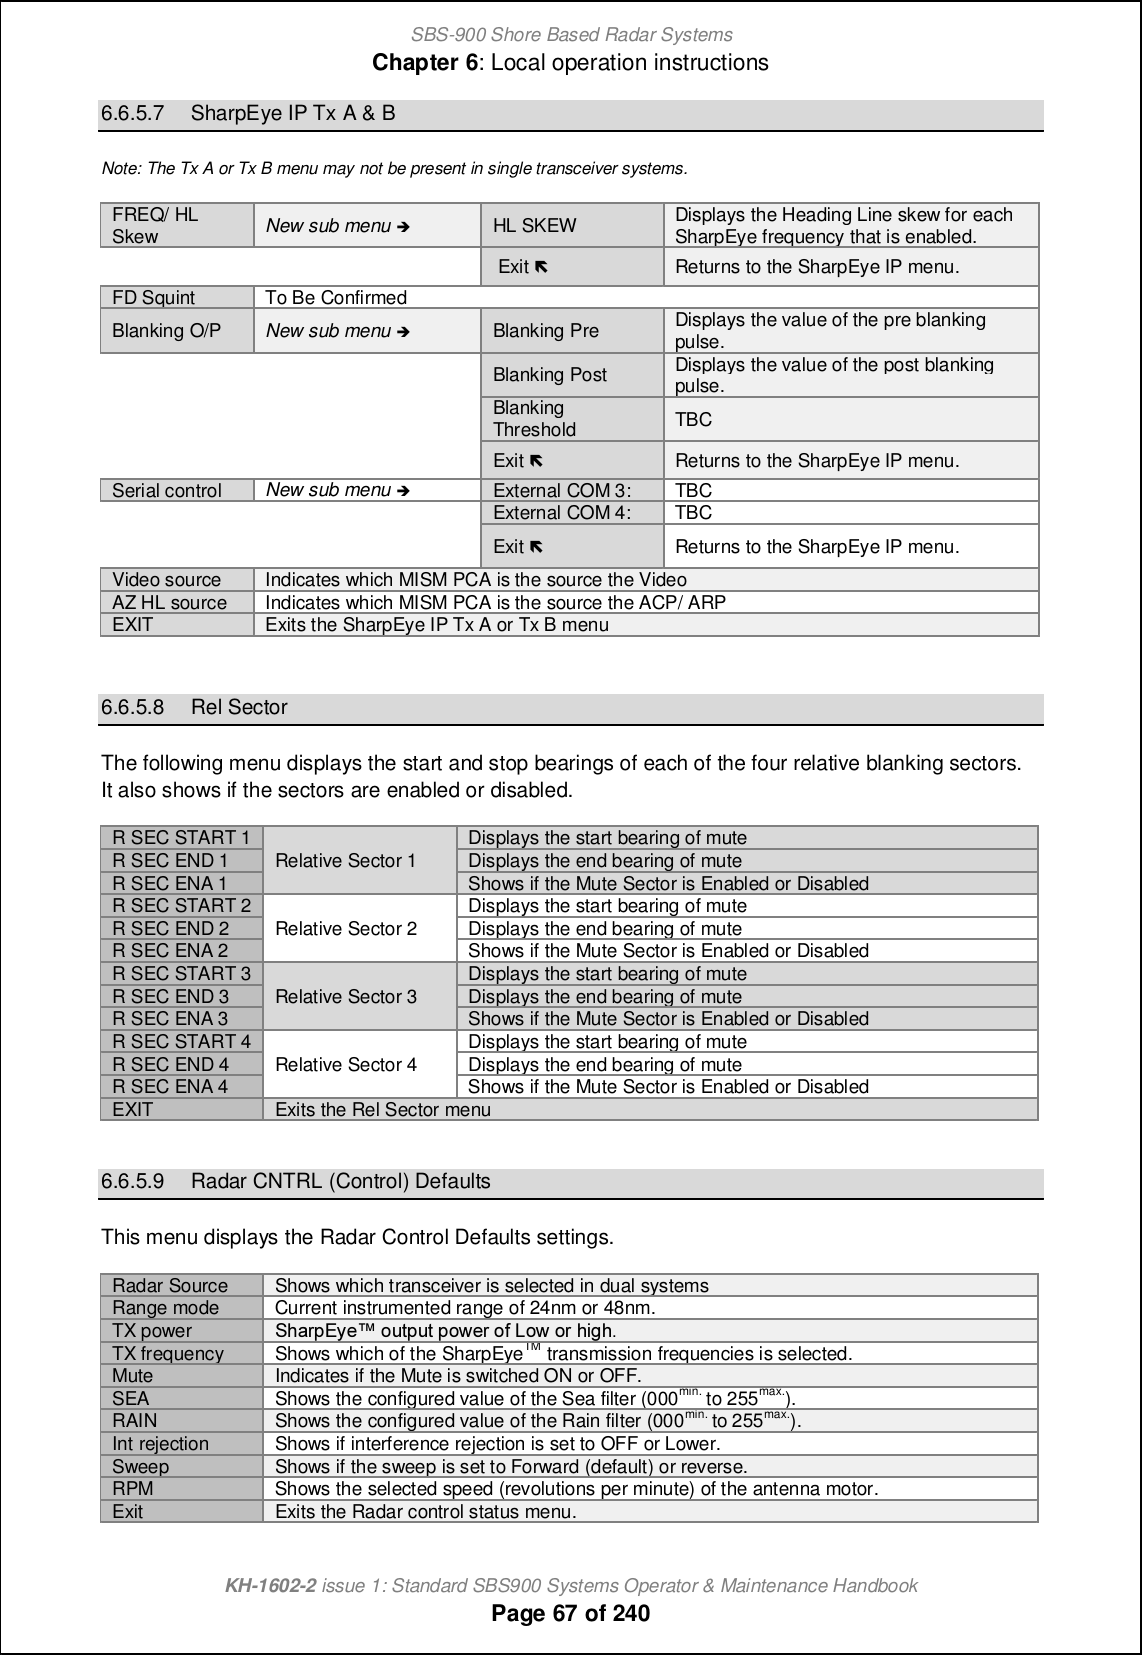 SBS-900 Shore Based Radar SystemsChapter 6: Local operation instructionsKH-1602-2 issue 1: Standard SBS900 Systems Operator &amp; Maintenance HandbookPage 67 of 2406.6.5.7 SharpEye IP Tx A &amp; BNote: The Tx A or Tx B menu may not be present in single transceiver systems.6.6.5.8 Rel SectorThe following menu displays the start and stop bearings of each of the four relative blanking sectors.It also shows if the sectors are enabled or disabled.R SEC START 1 Relative Sector 1 Displays the start bearing of muteR SEC END 1 Displays the end bearing of muteR SEC ENA 1Shows if the Mute Sector is Enabled or DisabledR SEC START 2 Relative Sector 2 Displays the start bearing of muteR SEC END 2Displays the end bearing of muteR SEC ENA 2Shows if the Mute Sector is Enabled or DisabledR SEC START 3 Relative Sector 3 Displays the start bearing of muteR SEC END 3Displays the end bearing of muteR SEC ENA 3 Shows if the Mute Sector is Enabled or DisabledR SEC START 4Relative Sector 4Displays the start bearing of muteR SEC END 4Displays the end bearing of muteR SEC ENA 4 Shows if the Mute Sector is Enabled or DisabledEXITExits the Rel Sector menu6.6.5.9 Radar CNTRL (Control) DefaultsThis menu displays the Radar Control Defaults settings.Radar SourceShows which transceiveris selected indual systemsRange mode Current instrumented range of 24nm or 48nm.TX power Rb[ljDs_x ionjon jiq_l i` Kiq il bcab-TX frequencyShows which of theSharpEyeTMtransmission frequencies is selected.Mute Indicates if the Mute is switched ON or OFF.SEAShows the configured value of the Sea filter (000min.to 255max.).RAIN Shows the configured value of the Rain filter (000min.to 255max.).IntrejectionShows if interference rejection is set to OFF or Lower.SweepShows if the sweep is set to Forward (default) or reverse.RPM Shows the selected speed (revolutions per minute) of the antenna motor.ExitExits the Radar control status menu.FREQ/ HLSkewNew sub menu +HL SKEW Displays the Heading Line skew for eachSharpEyefrequencythatisenabled.Exit ,Returns to the SharpEye IP menu.FD SquintTo Be ConfirmedBlanking O/P New sub menu +Blanking Pre Displays the value of the pre blankingpulse.Blanking Post Displays the value of the post blankingpulse.BlankingThreshold TBCExit ,Returns to the SharpEye IP menu.Serial controlNew sub menu+External COM 3:TBCExternal COM 4: TBCExit ,Returns to the SharpEye IP menu.Video source Indicates which MISM PCA is the source the VideoAZ HL sourceIndicates which MISM PCA is the source the ACP/ ARPEXIT Exits the SharpEye IP Tx A or Tx B menu